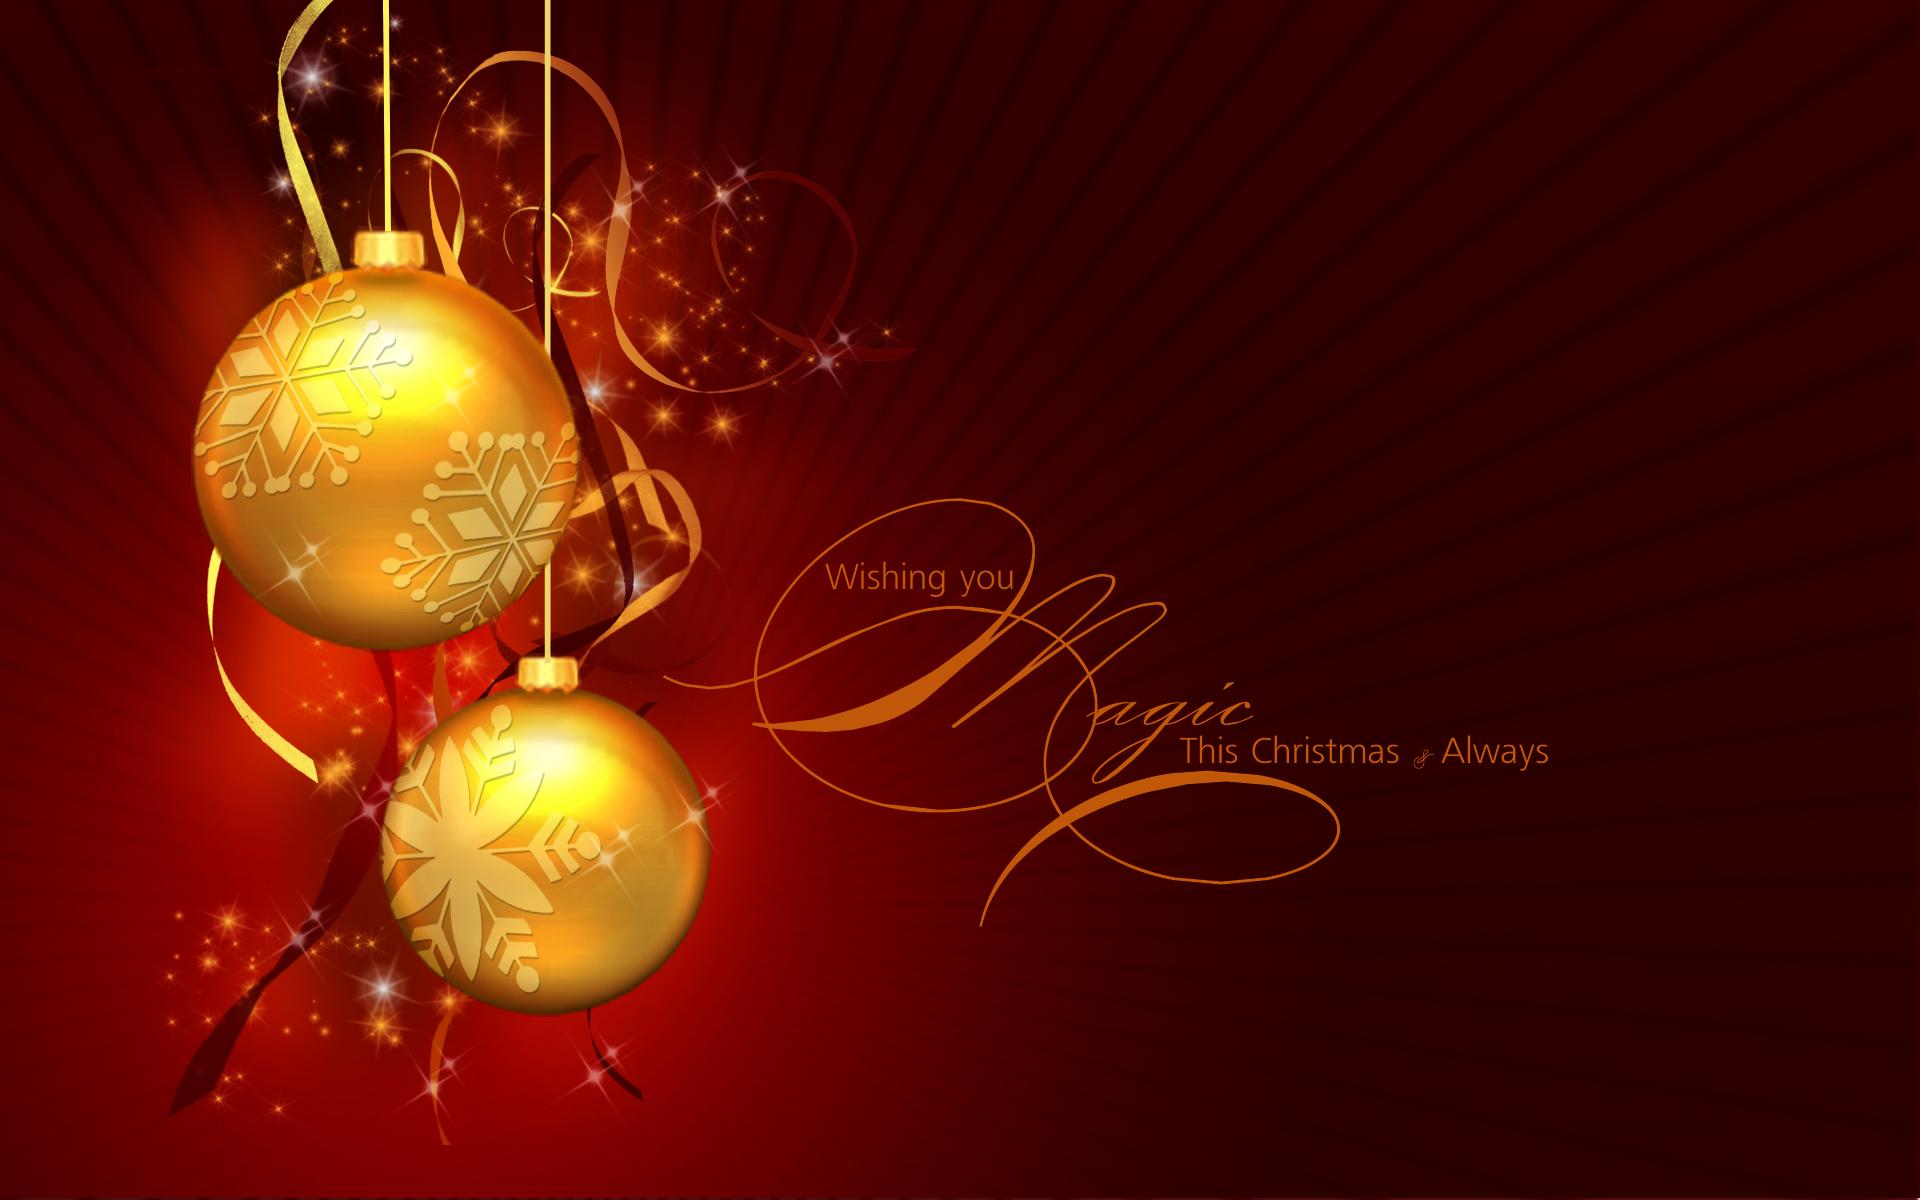 Magical Christmas holiday free desktop background wallpaper